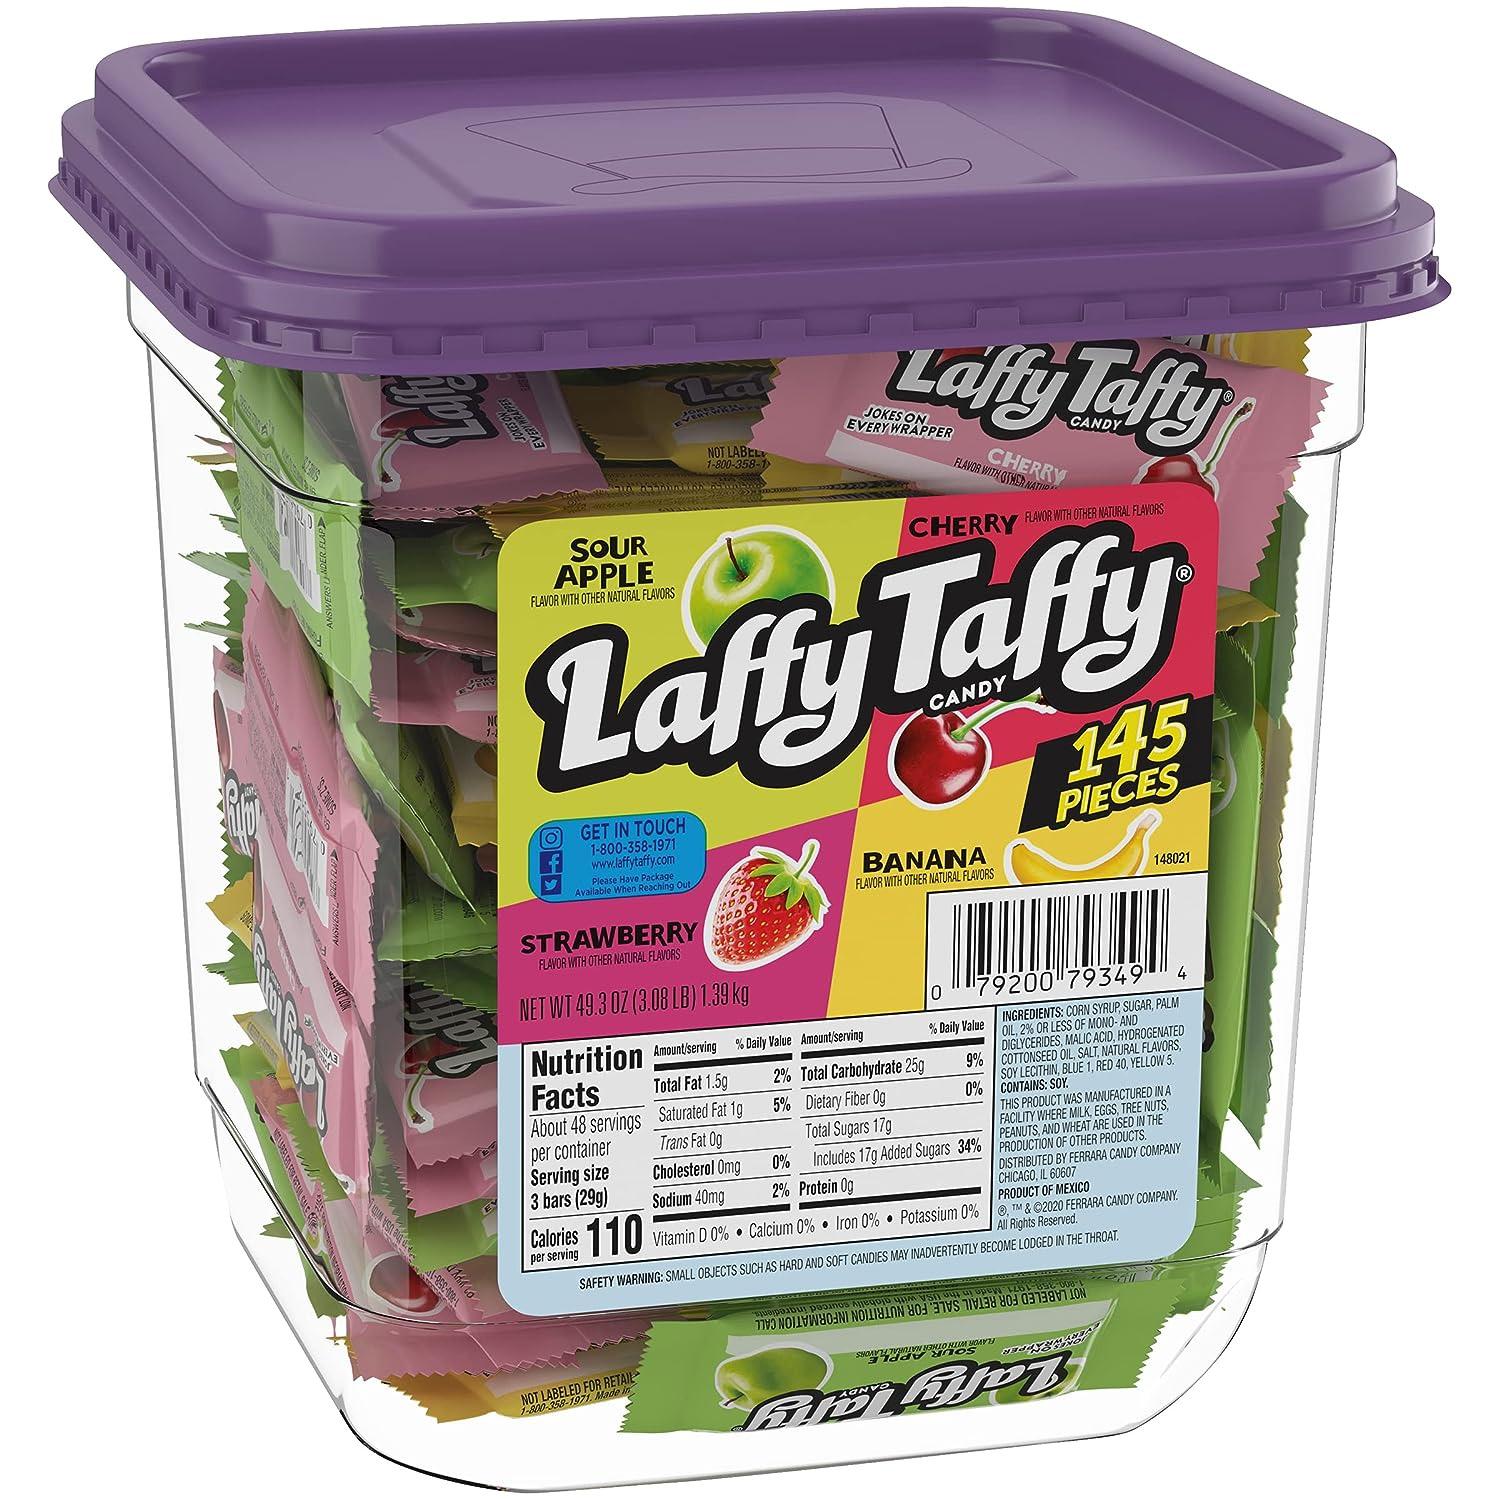 Laffy Assorted Fruit Flavored Taffy Candy 145-Piece for $10.24